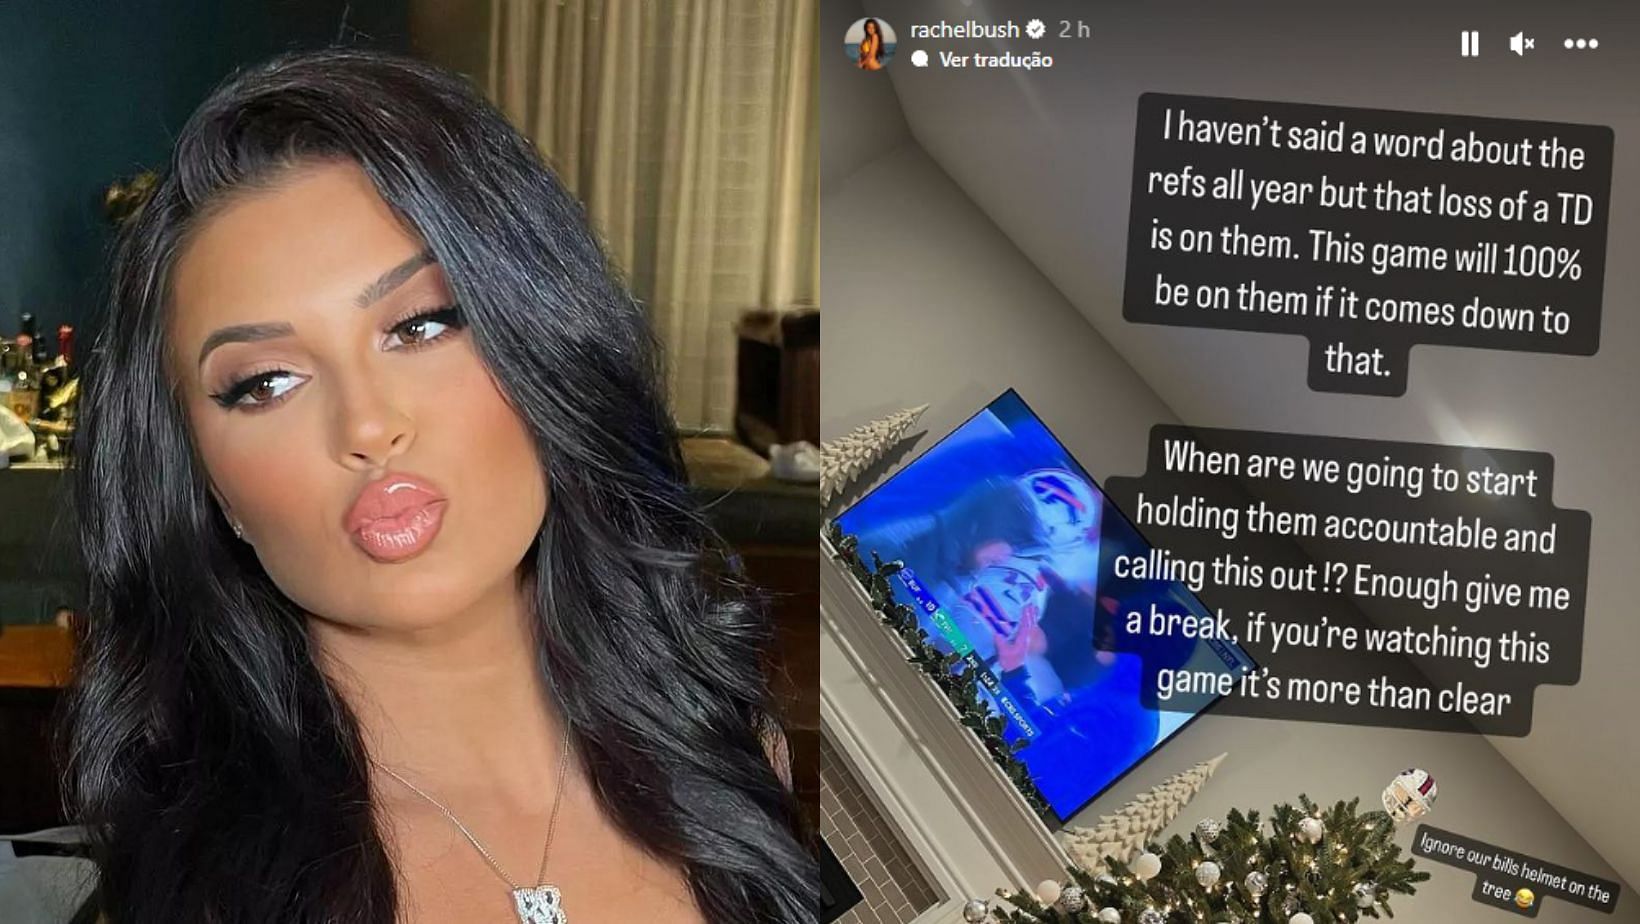 Rachel Bush was upset with the referees after the Bills loss